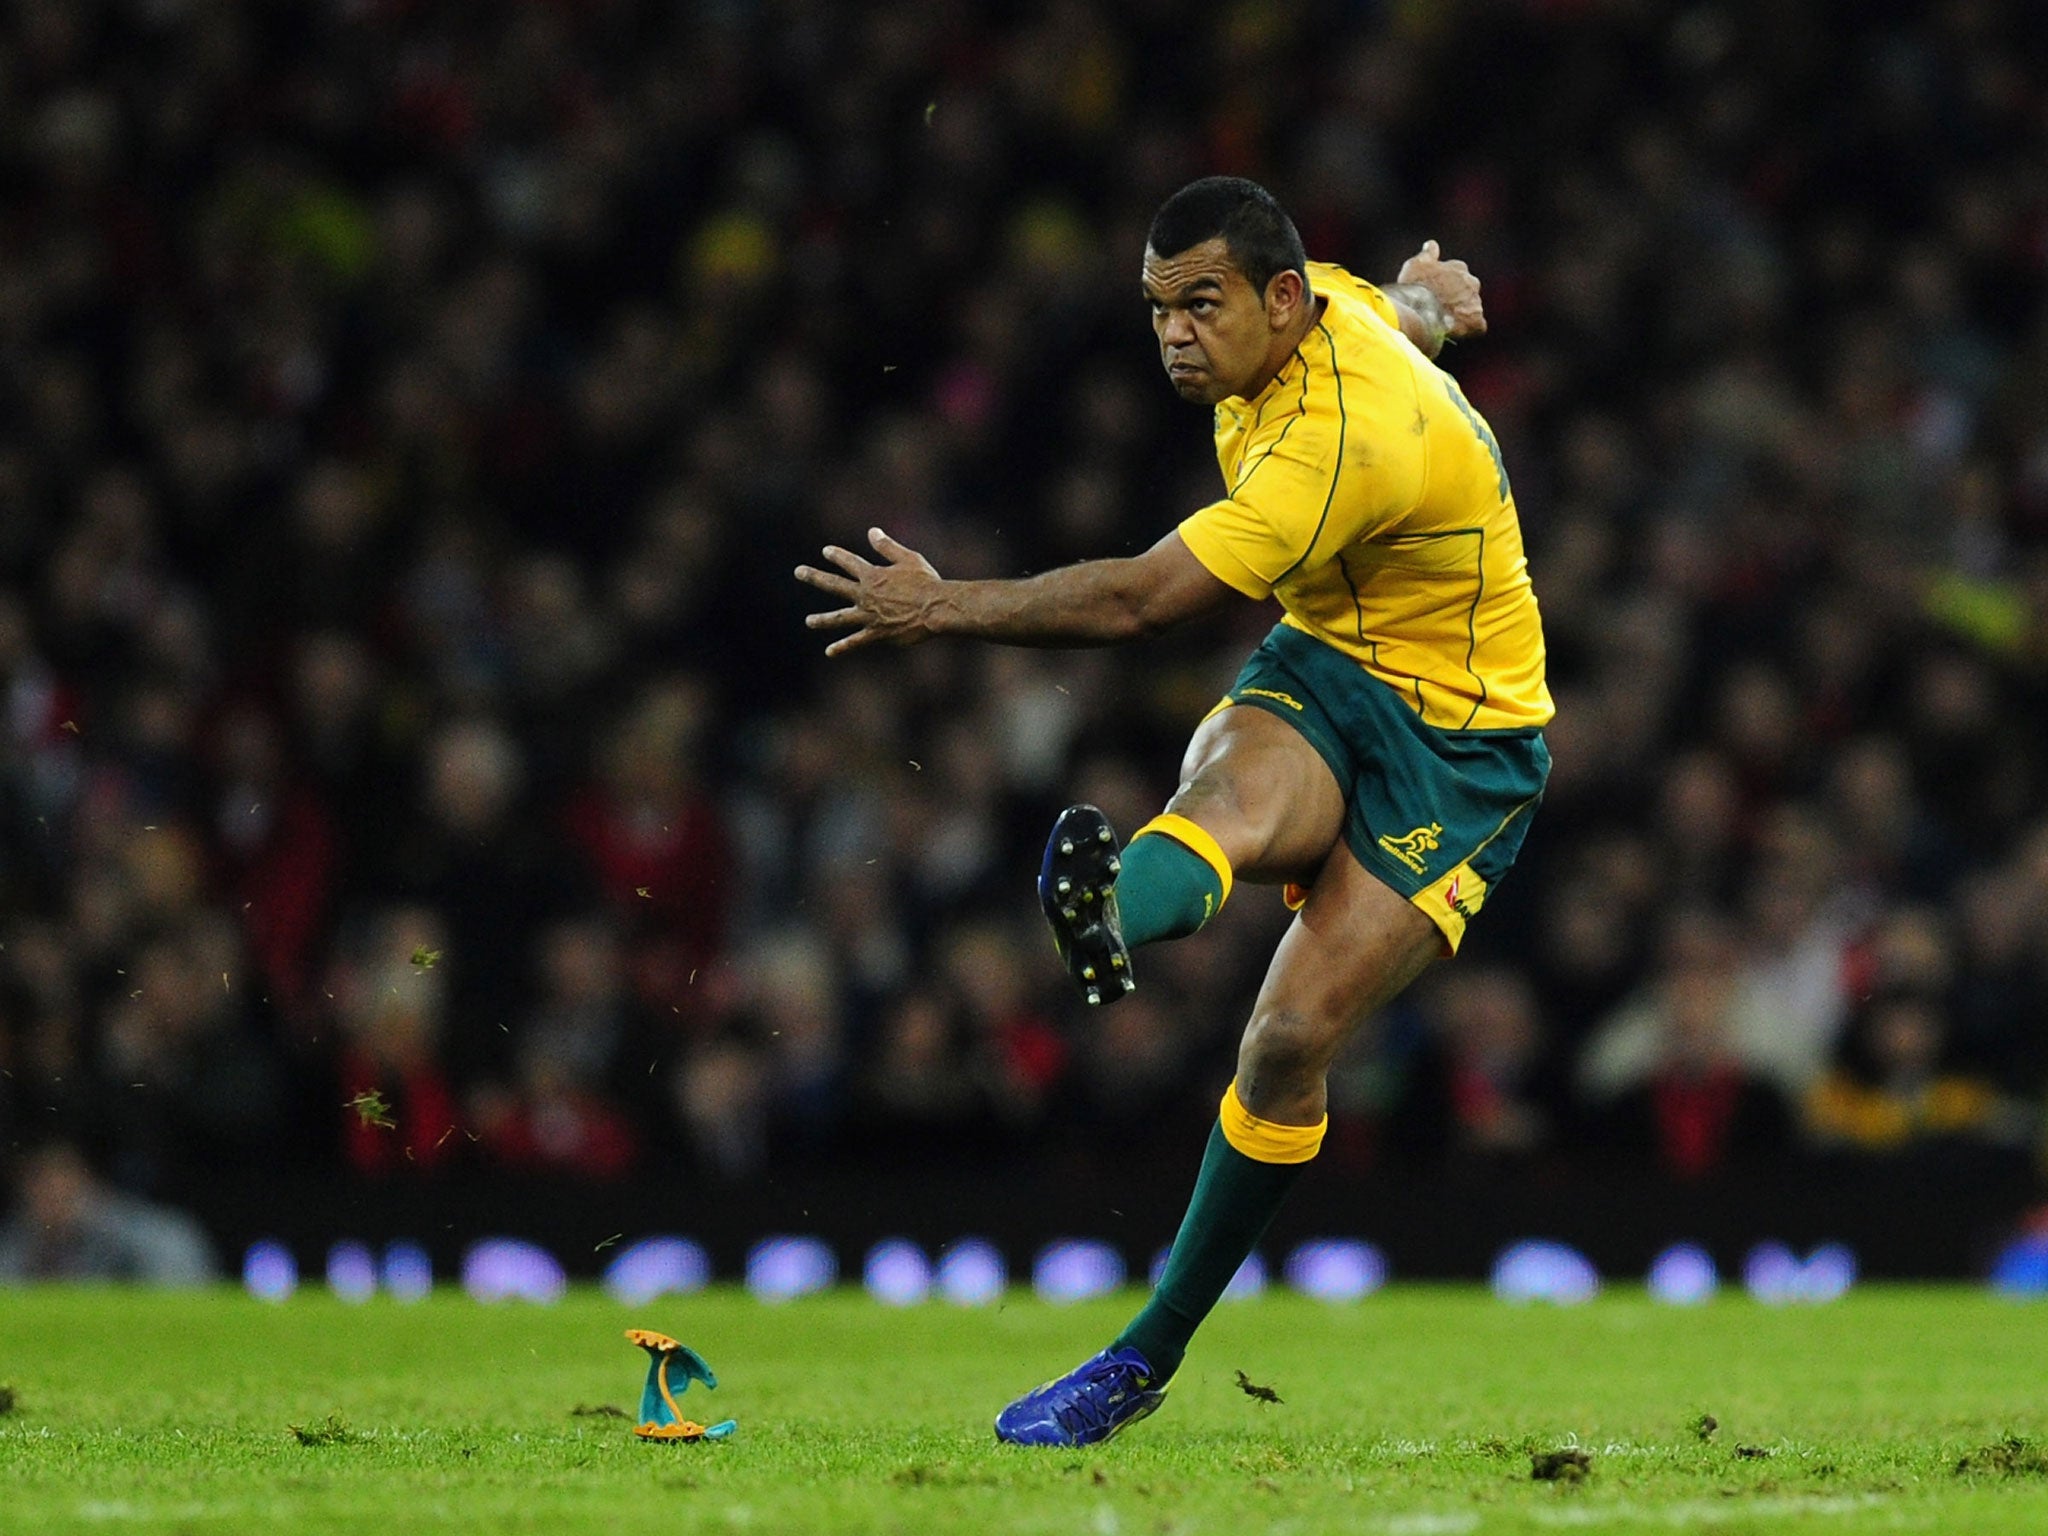 Australia's Kurtley Beale impressed for his side against scoring a vital last minute try